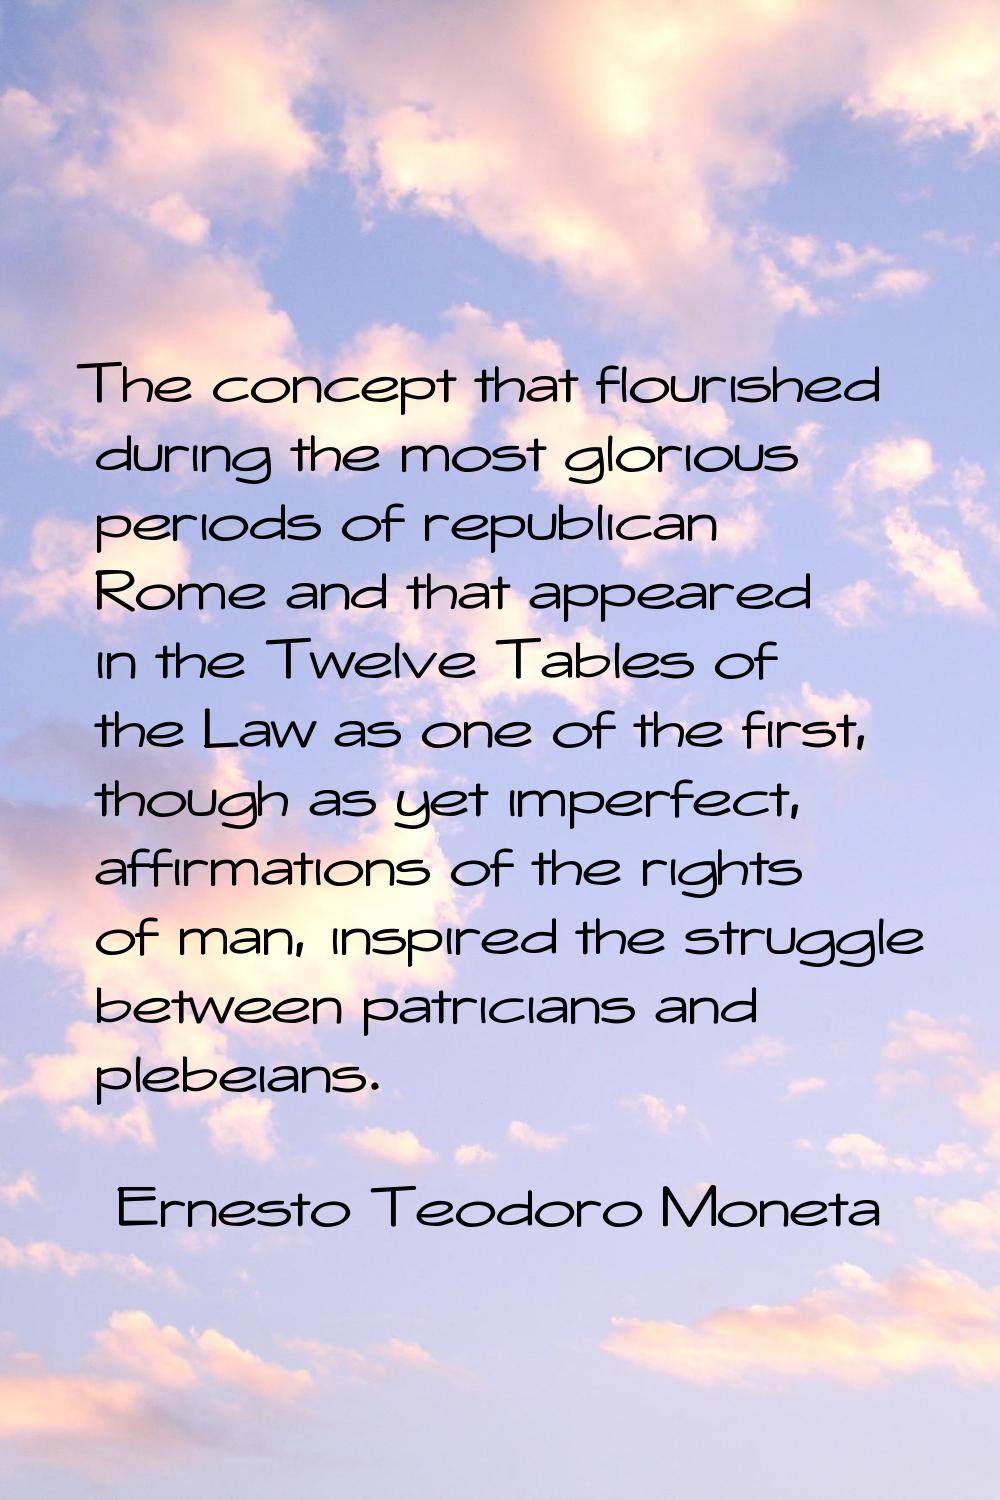 The concept that flourished during the most glorious periods of republican Rome and that appeared i